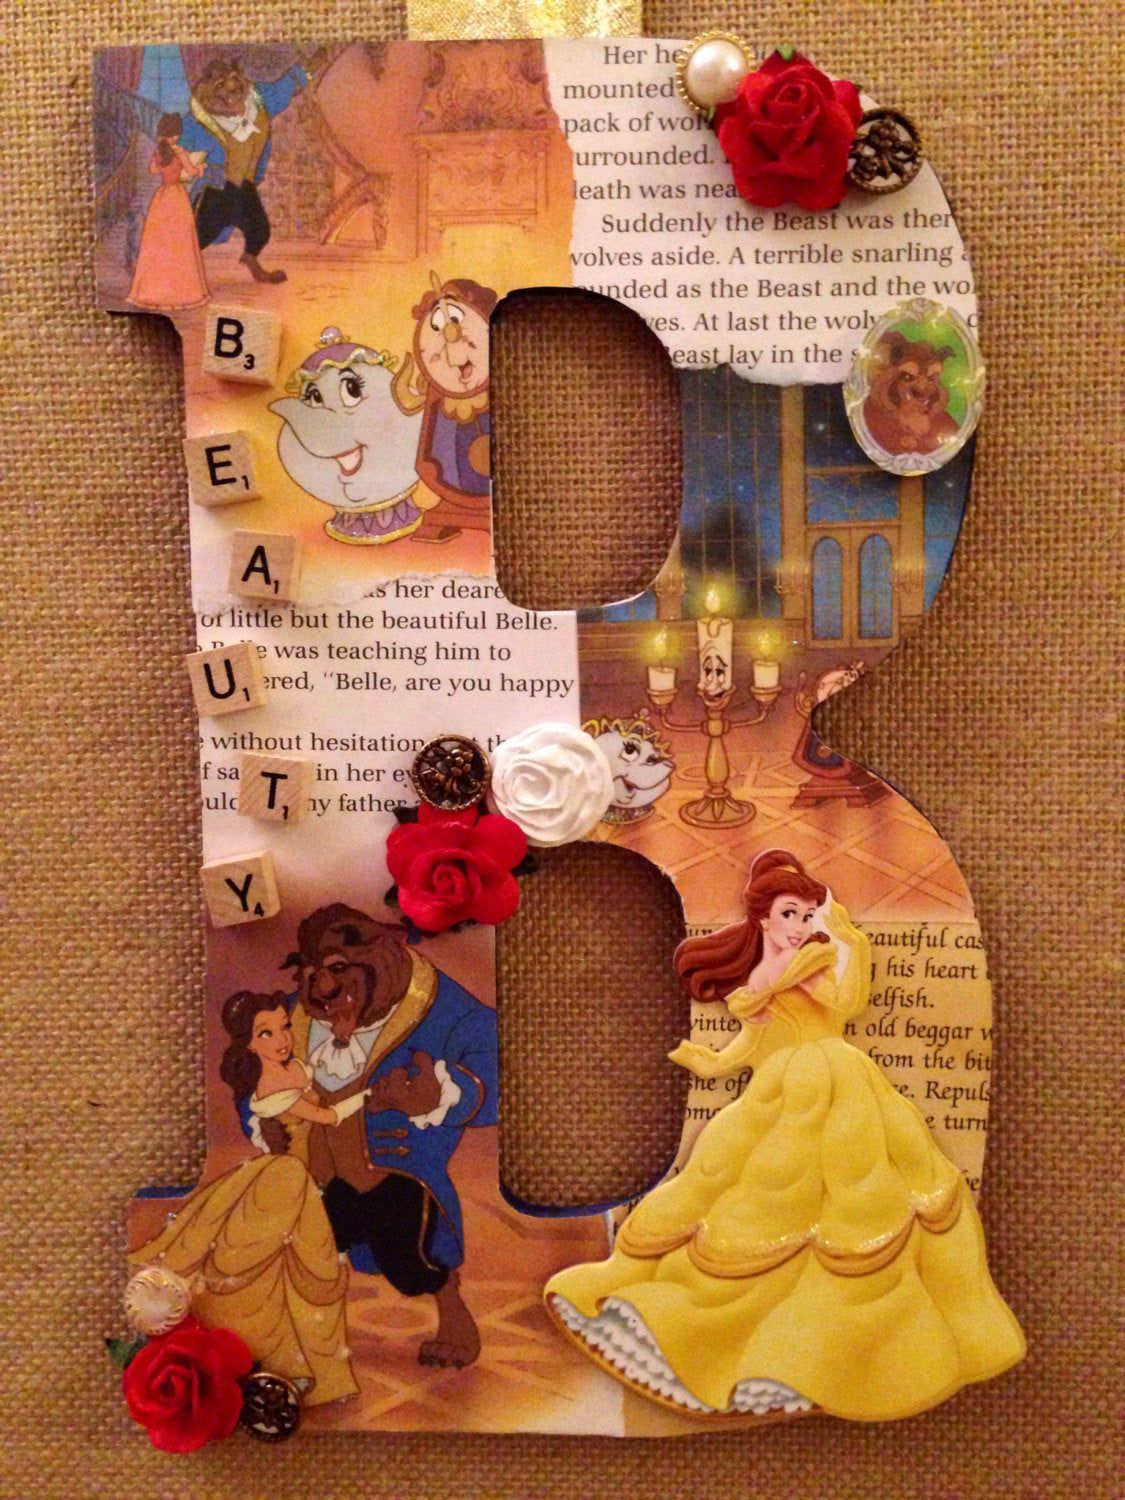 Any Letter in Beauty and the Beast Disney themed wooden | Etsy - Any Letter in Beauty and the Beast Disney themed wooden | Etsy -   18 beauty And The Beast gifts ideas